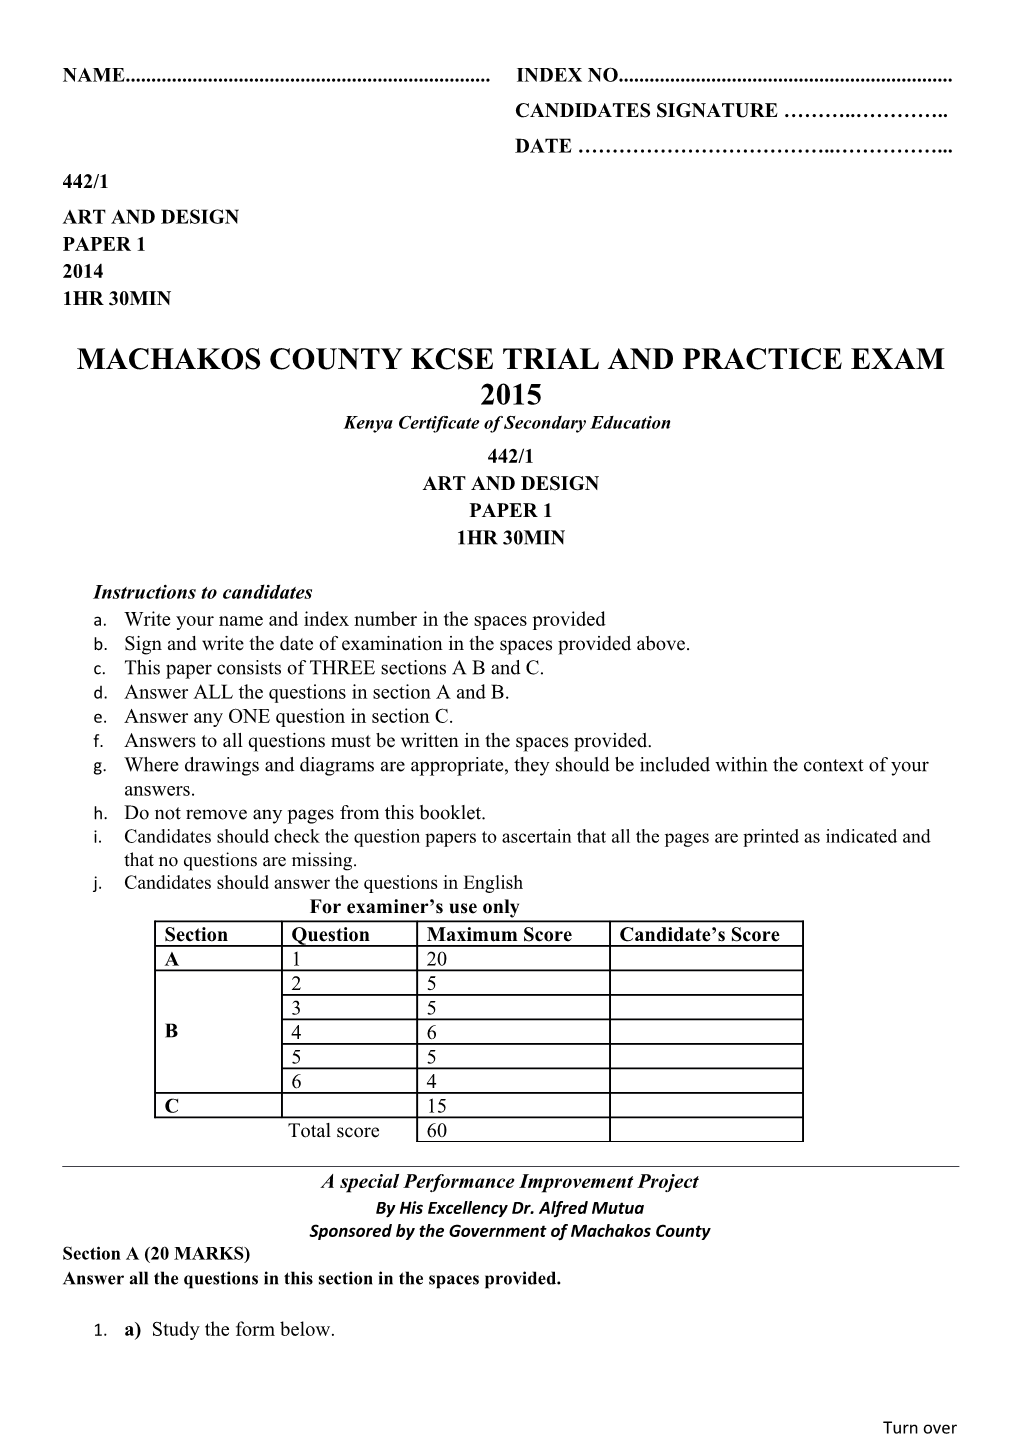 Machakos County Kcse Trial and Practice Exam 2015